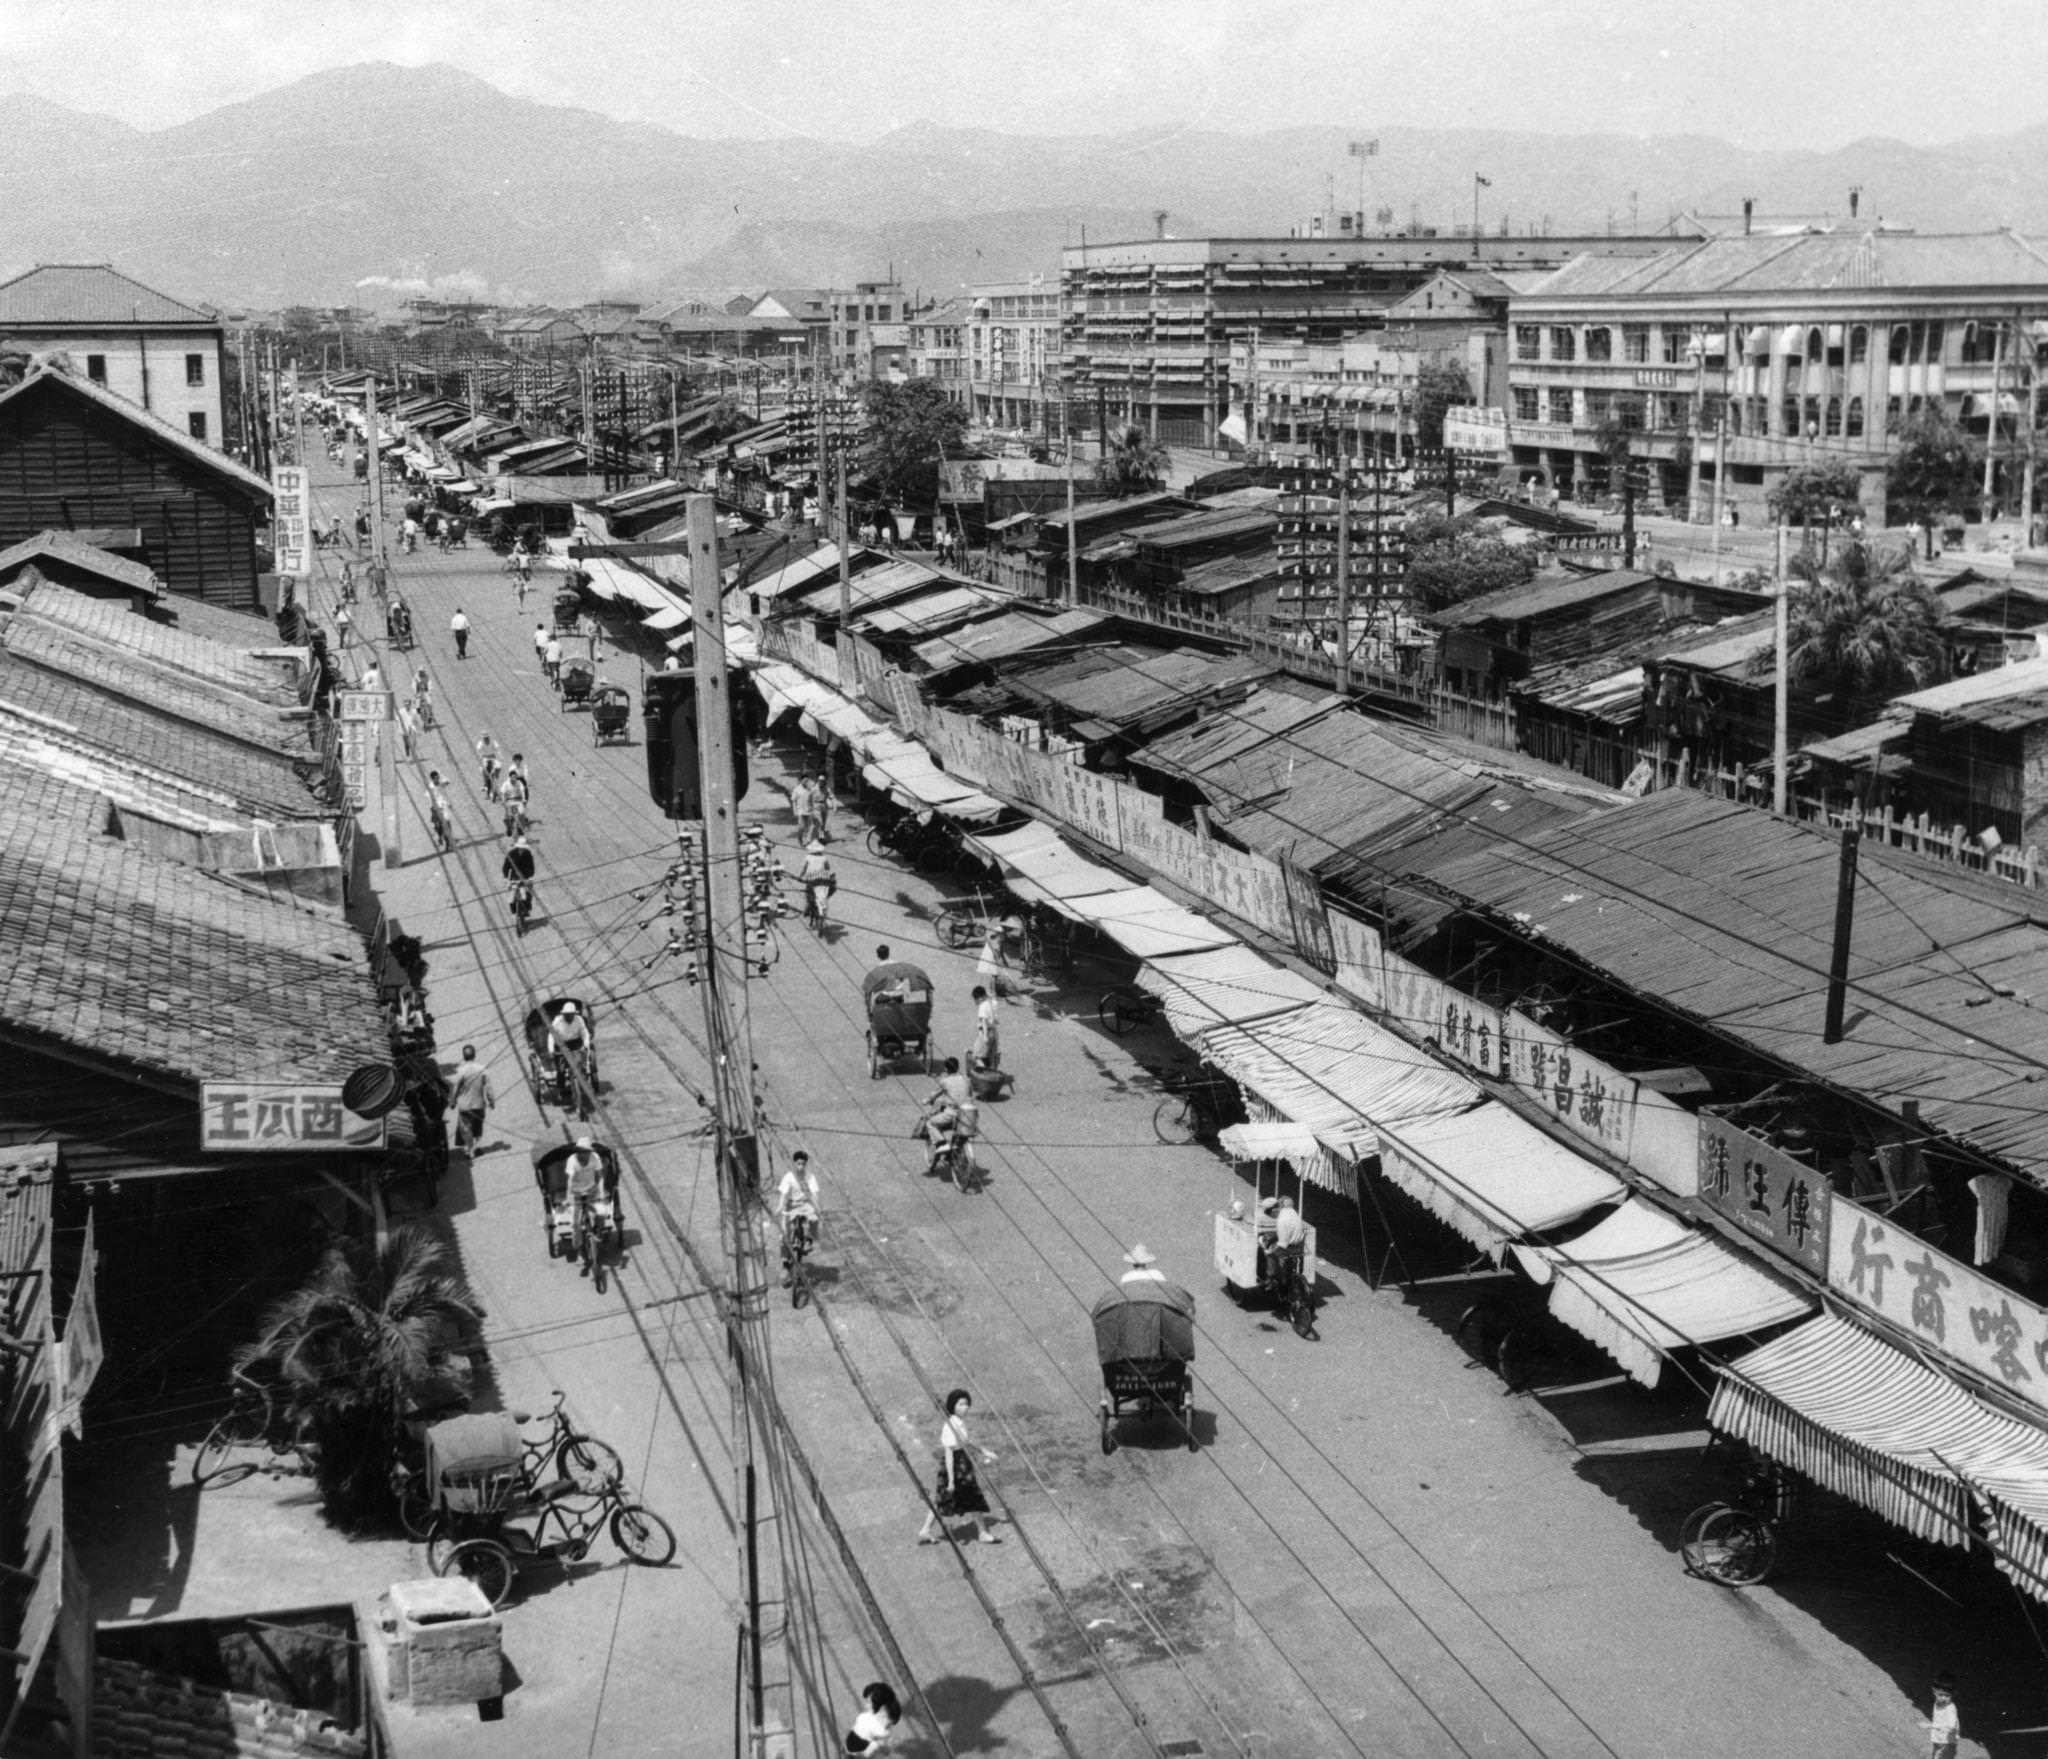 Shops on Chung Hwa Road, Taipei, Taiwan (Formosa), built mostly after 1949 by Chinese refugees from the mainland, 1950s